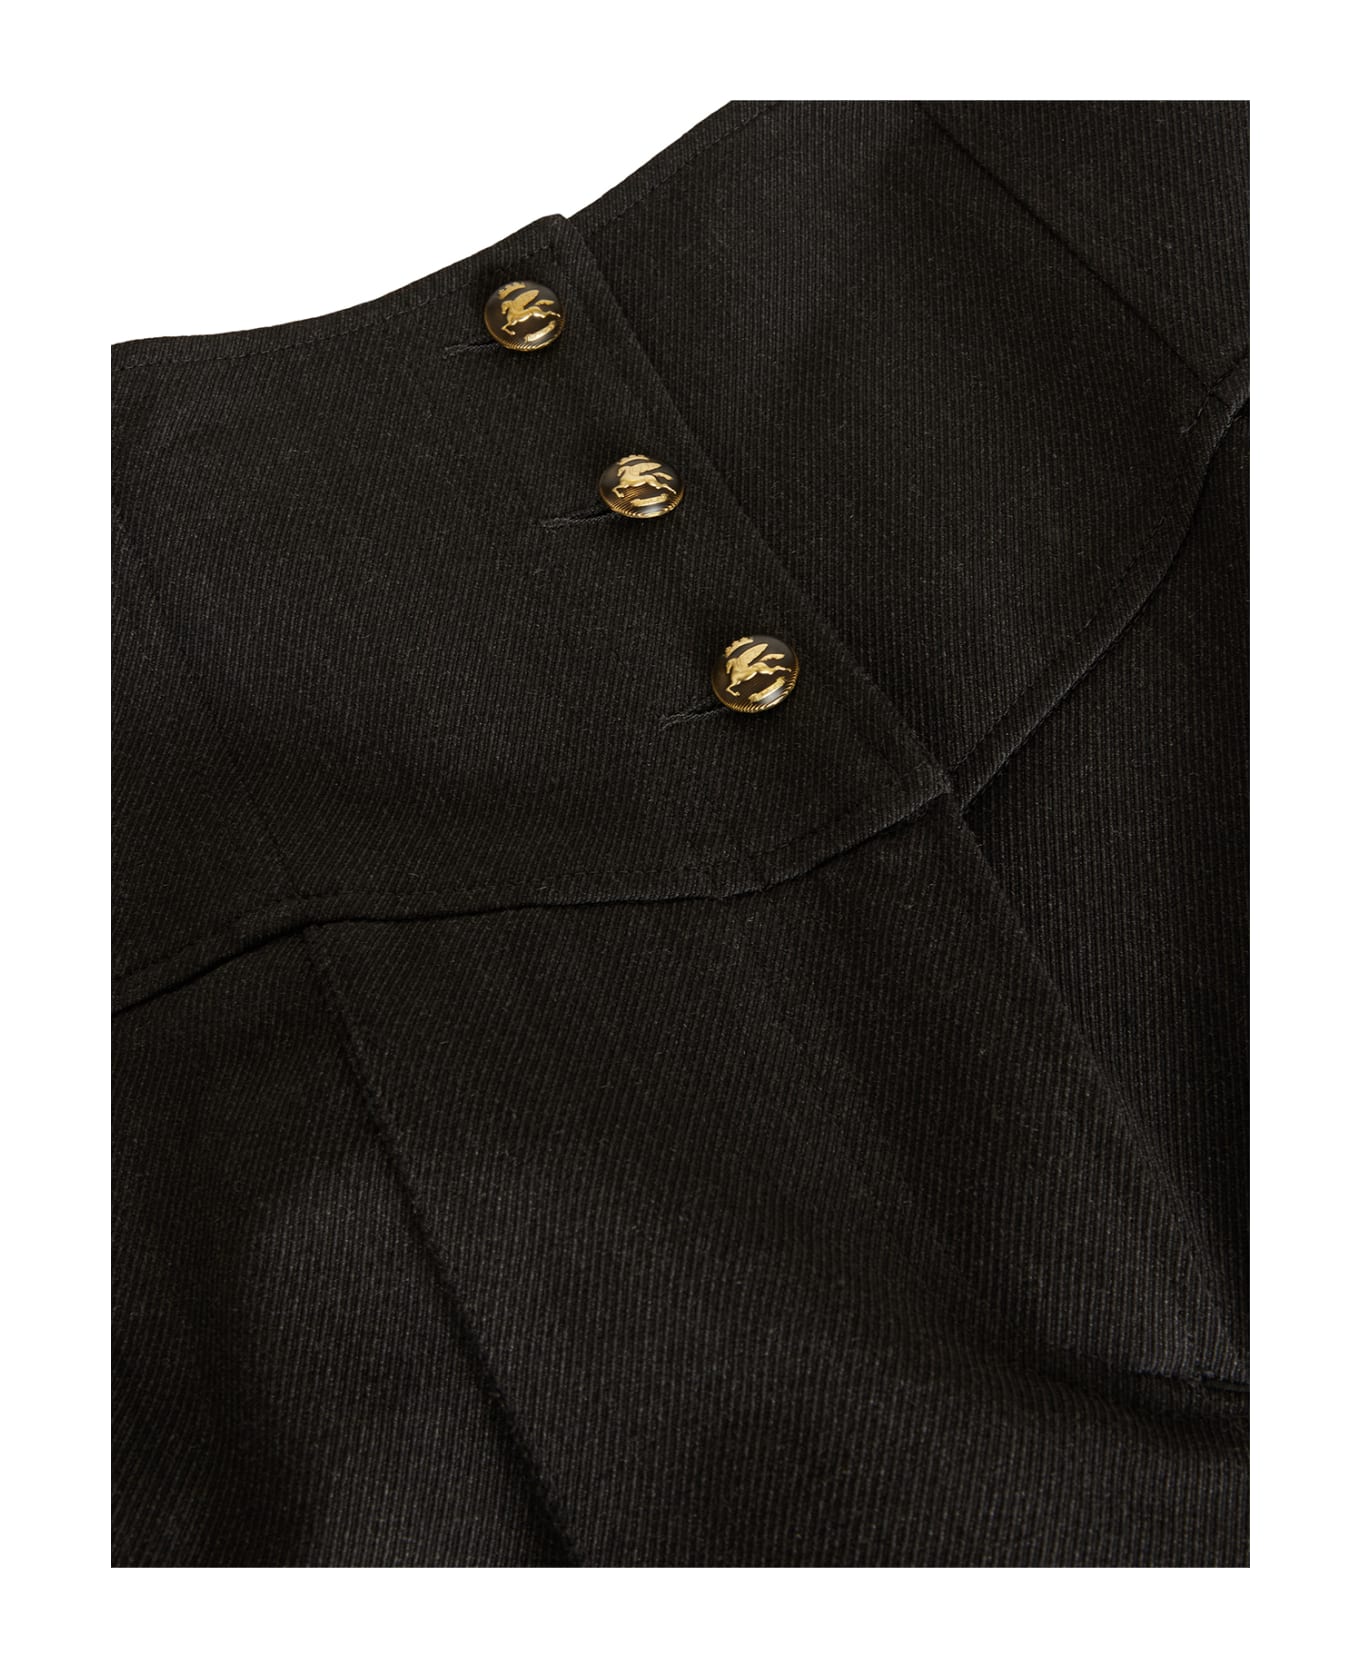 Etro Woman Black High Waist Trousers With Pegasus Buttons - Nero